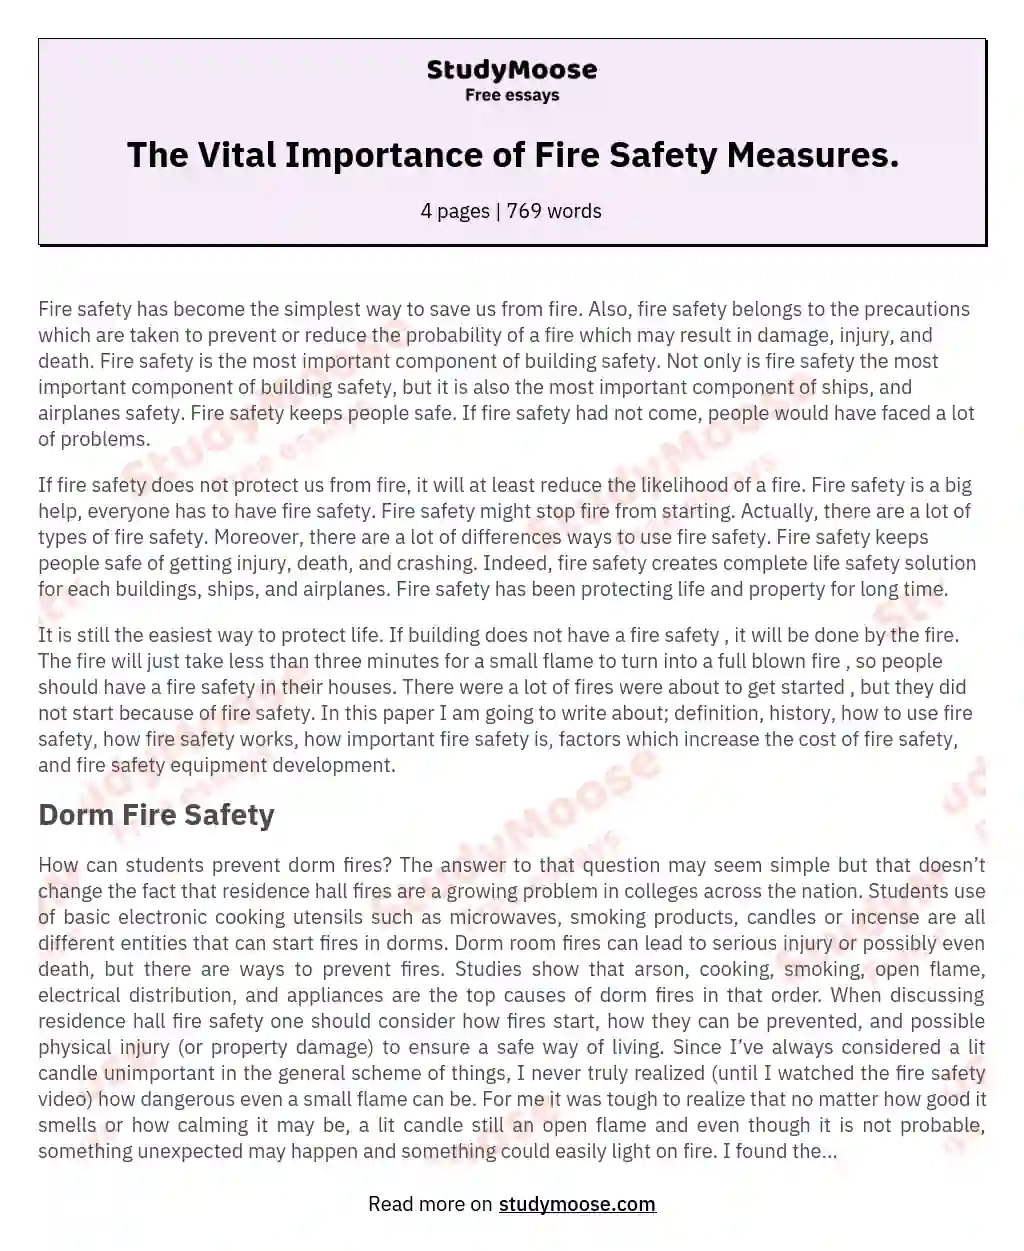 The Vital Importance of Fire Safety Measures. essay